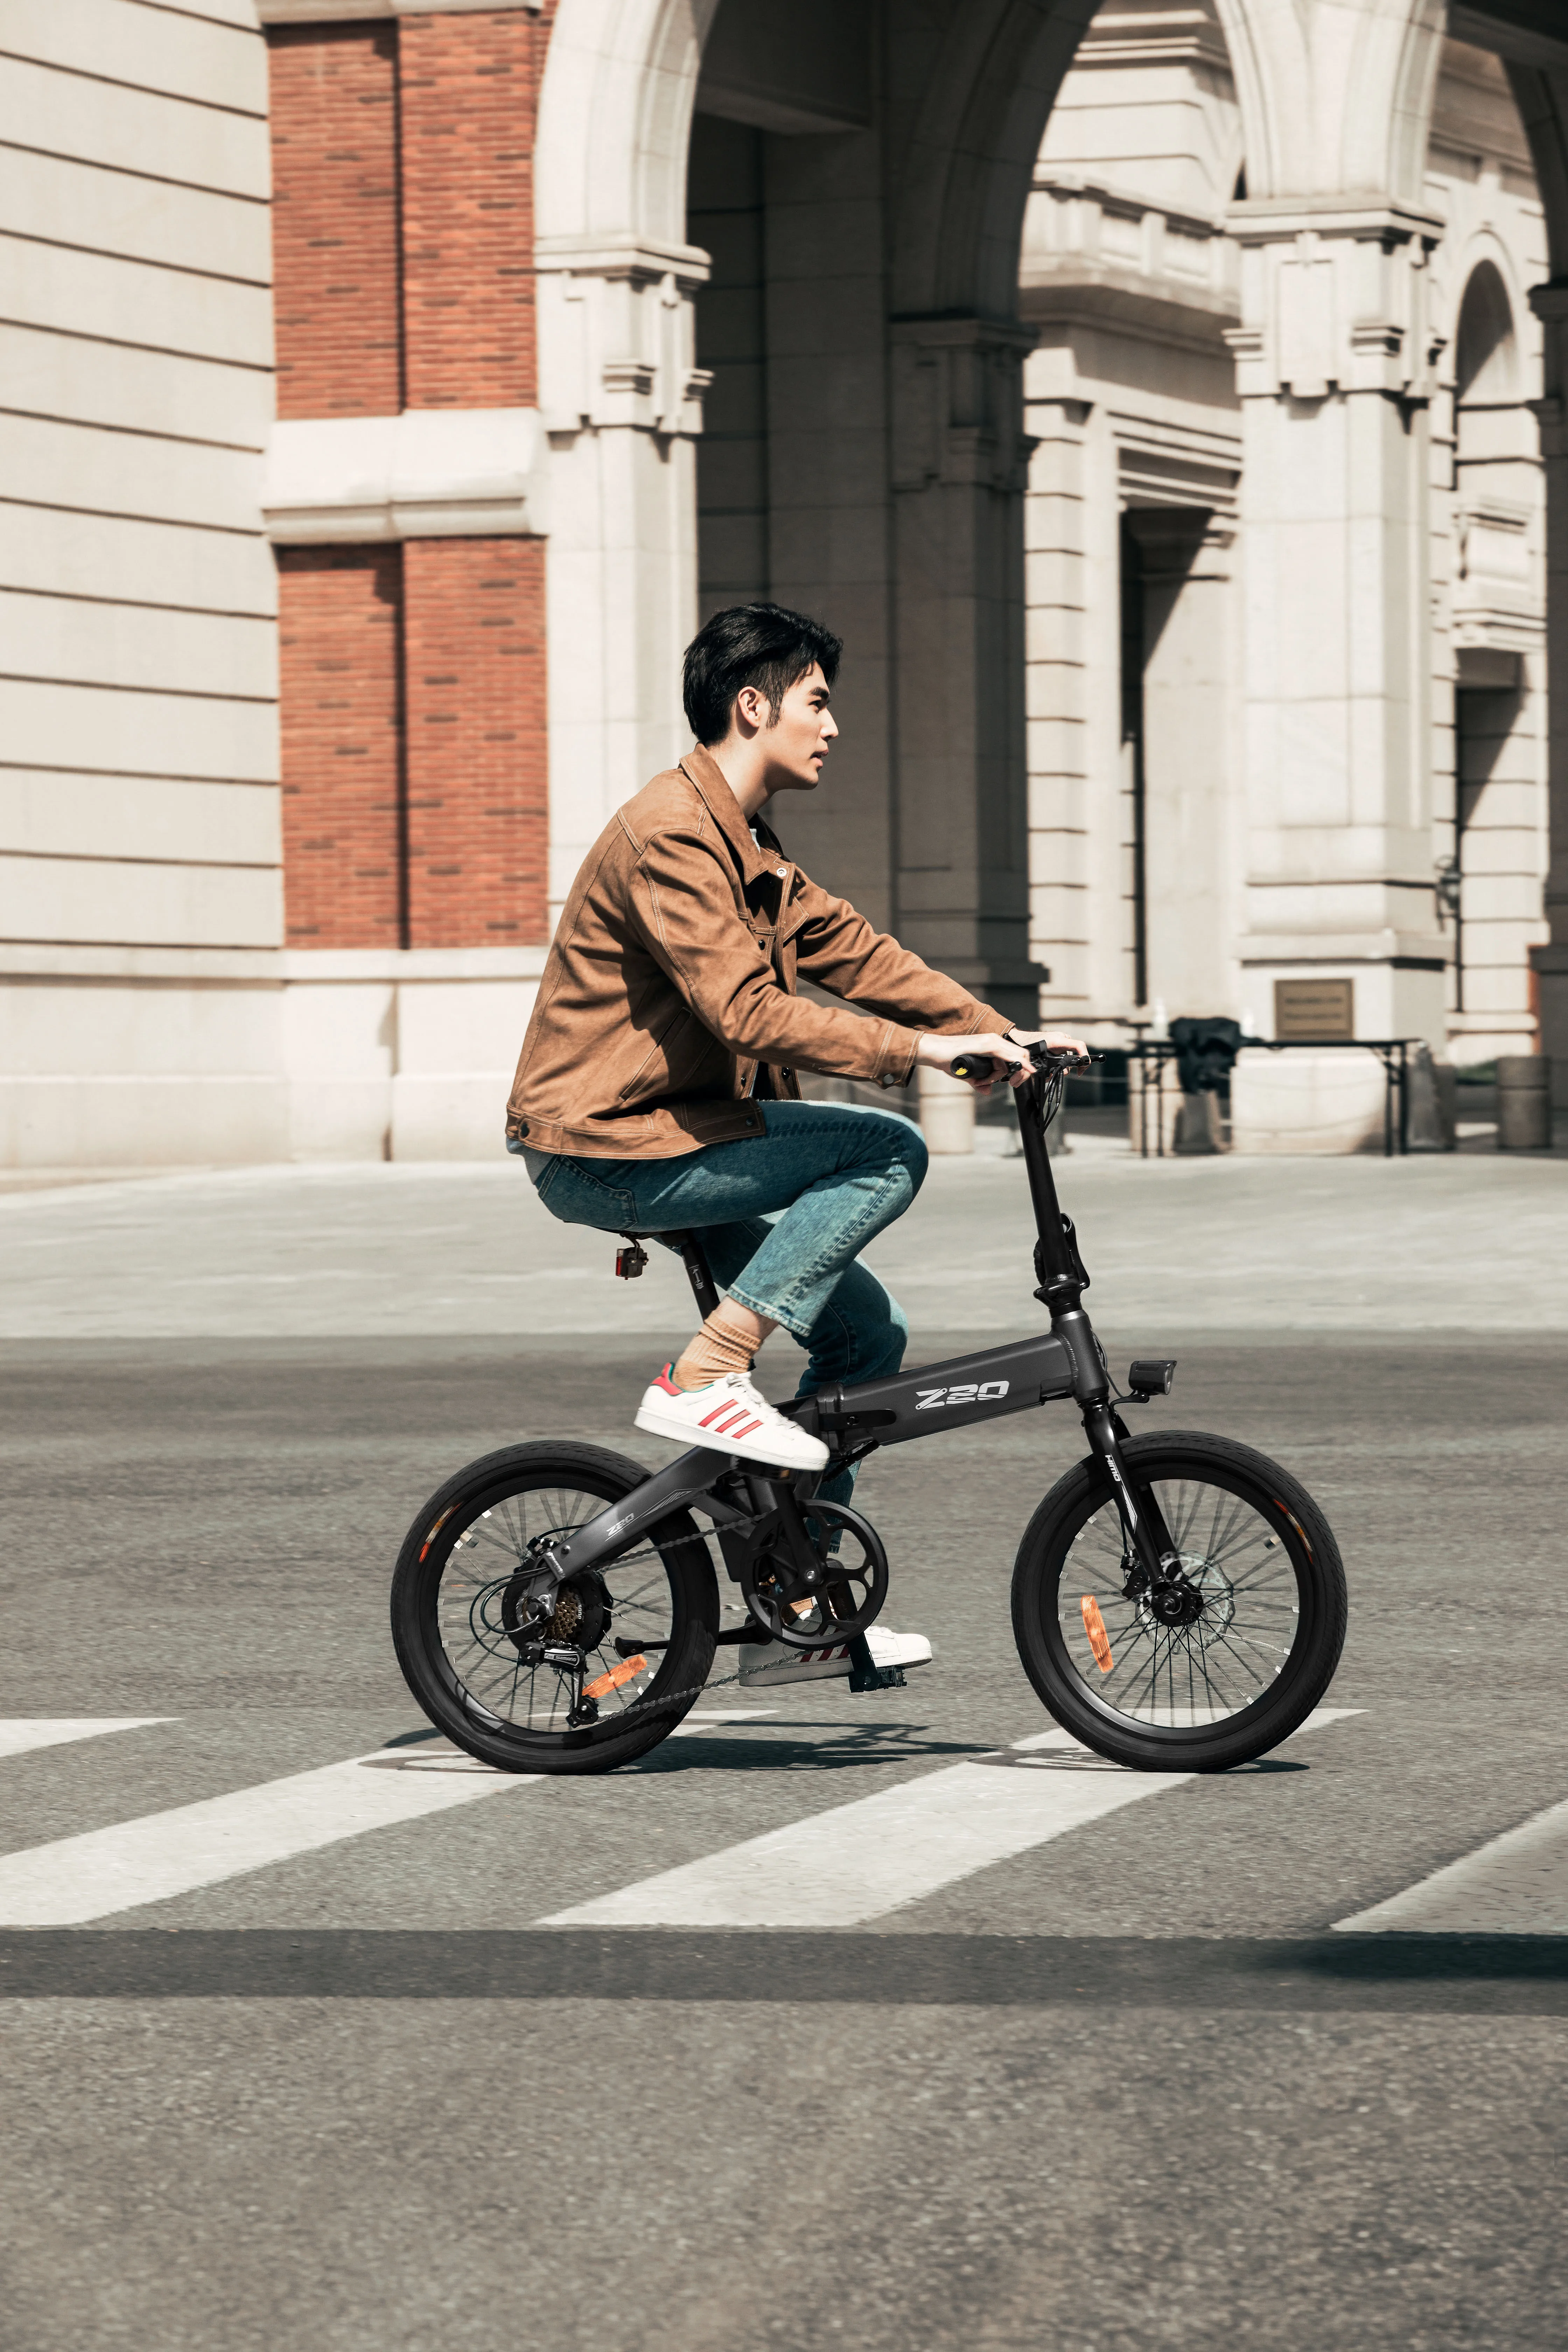 HIMO Z20 Electric Bicycle